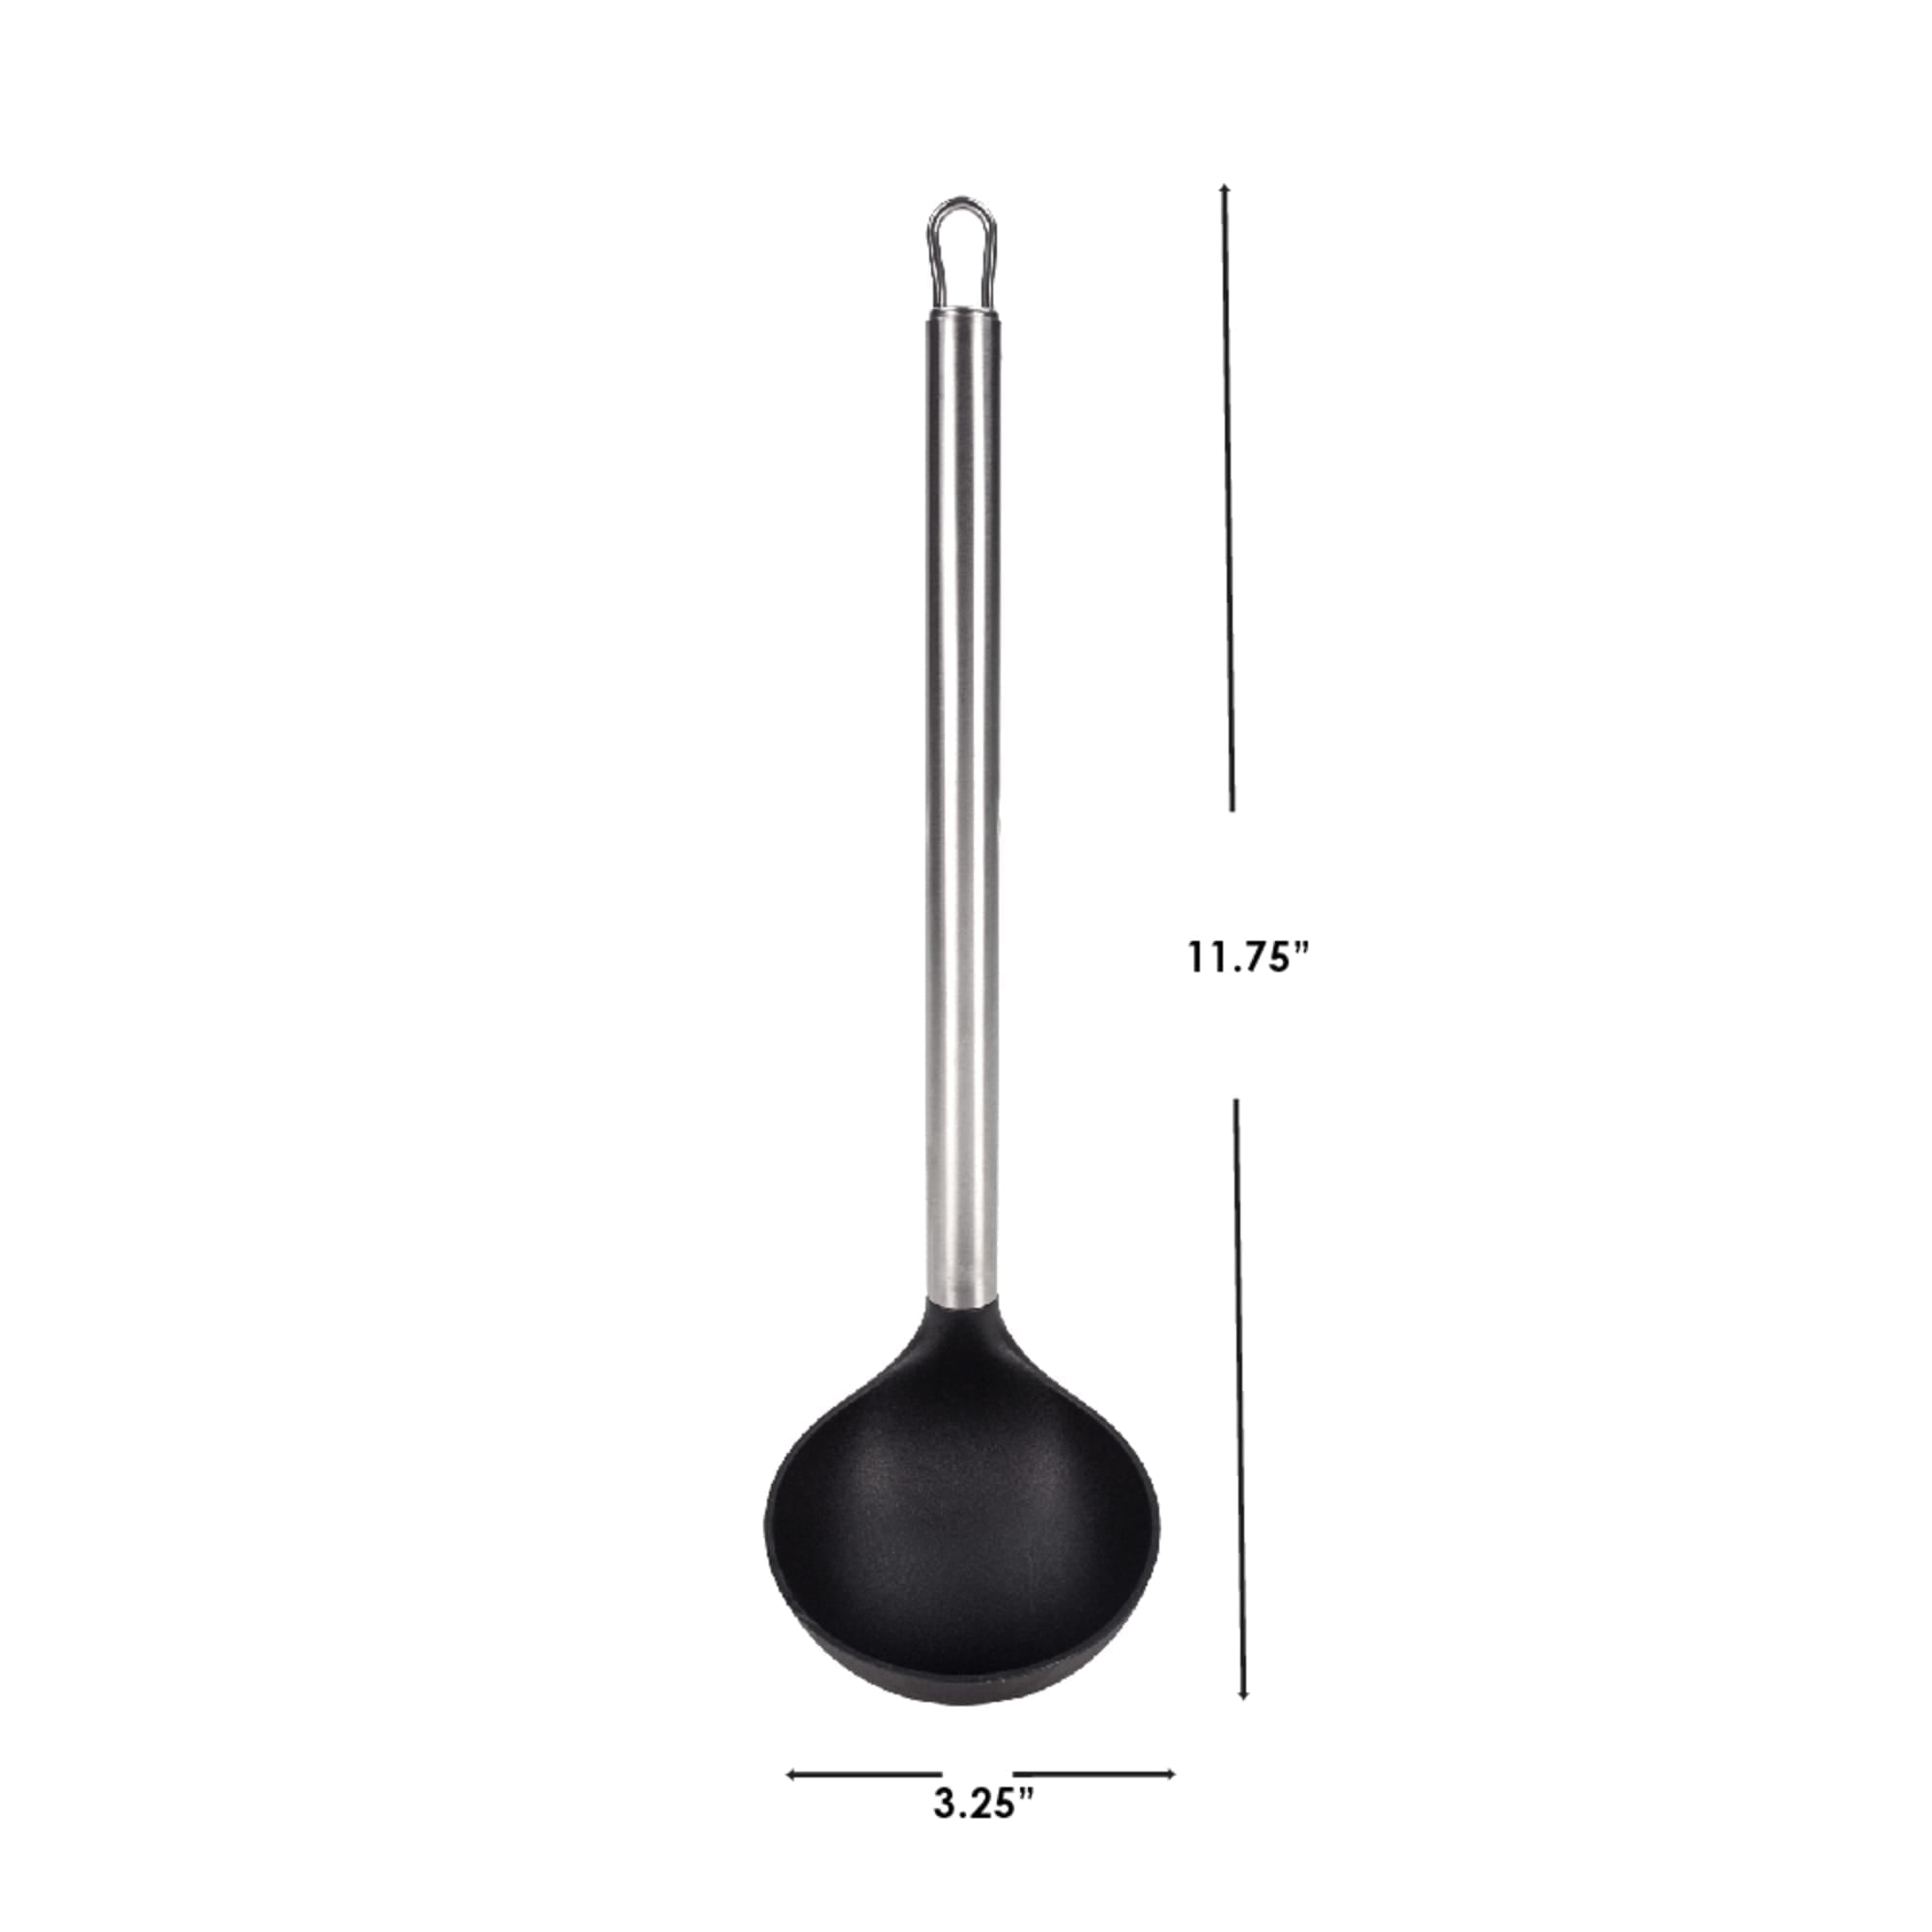 Home Basics Vista Collection Stainless Steel Soup Ladle $2.00 EACH, CASE PACK OF 24